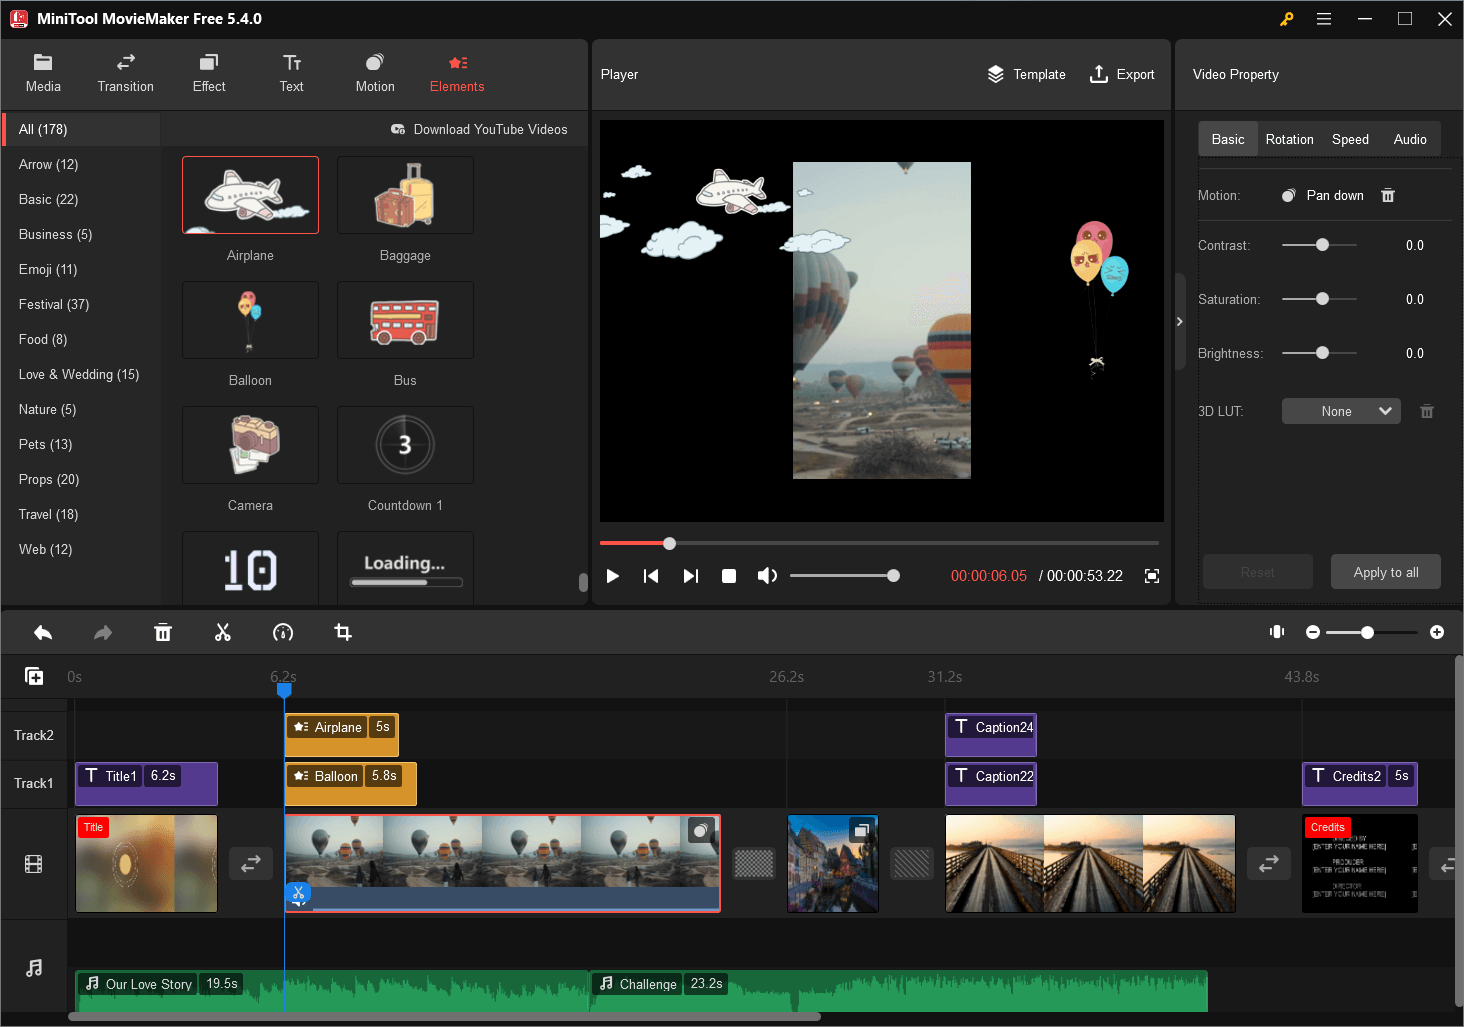 editing a video with MiniTool MovieMaker